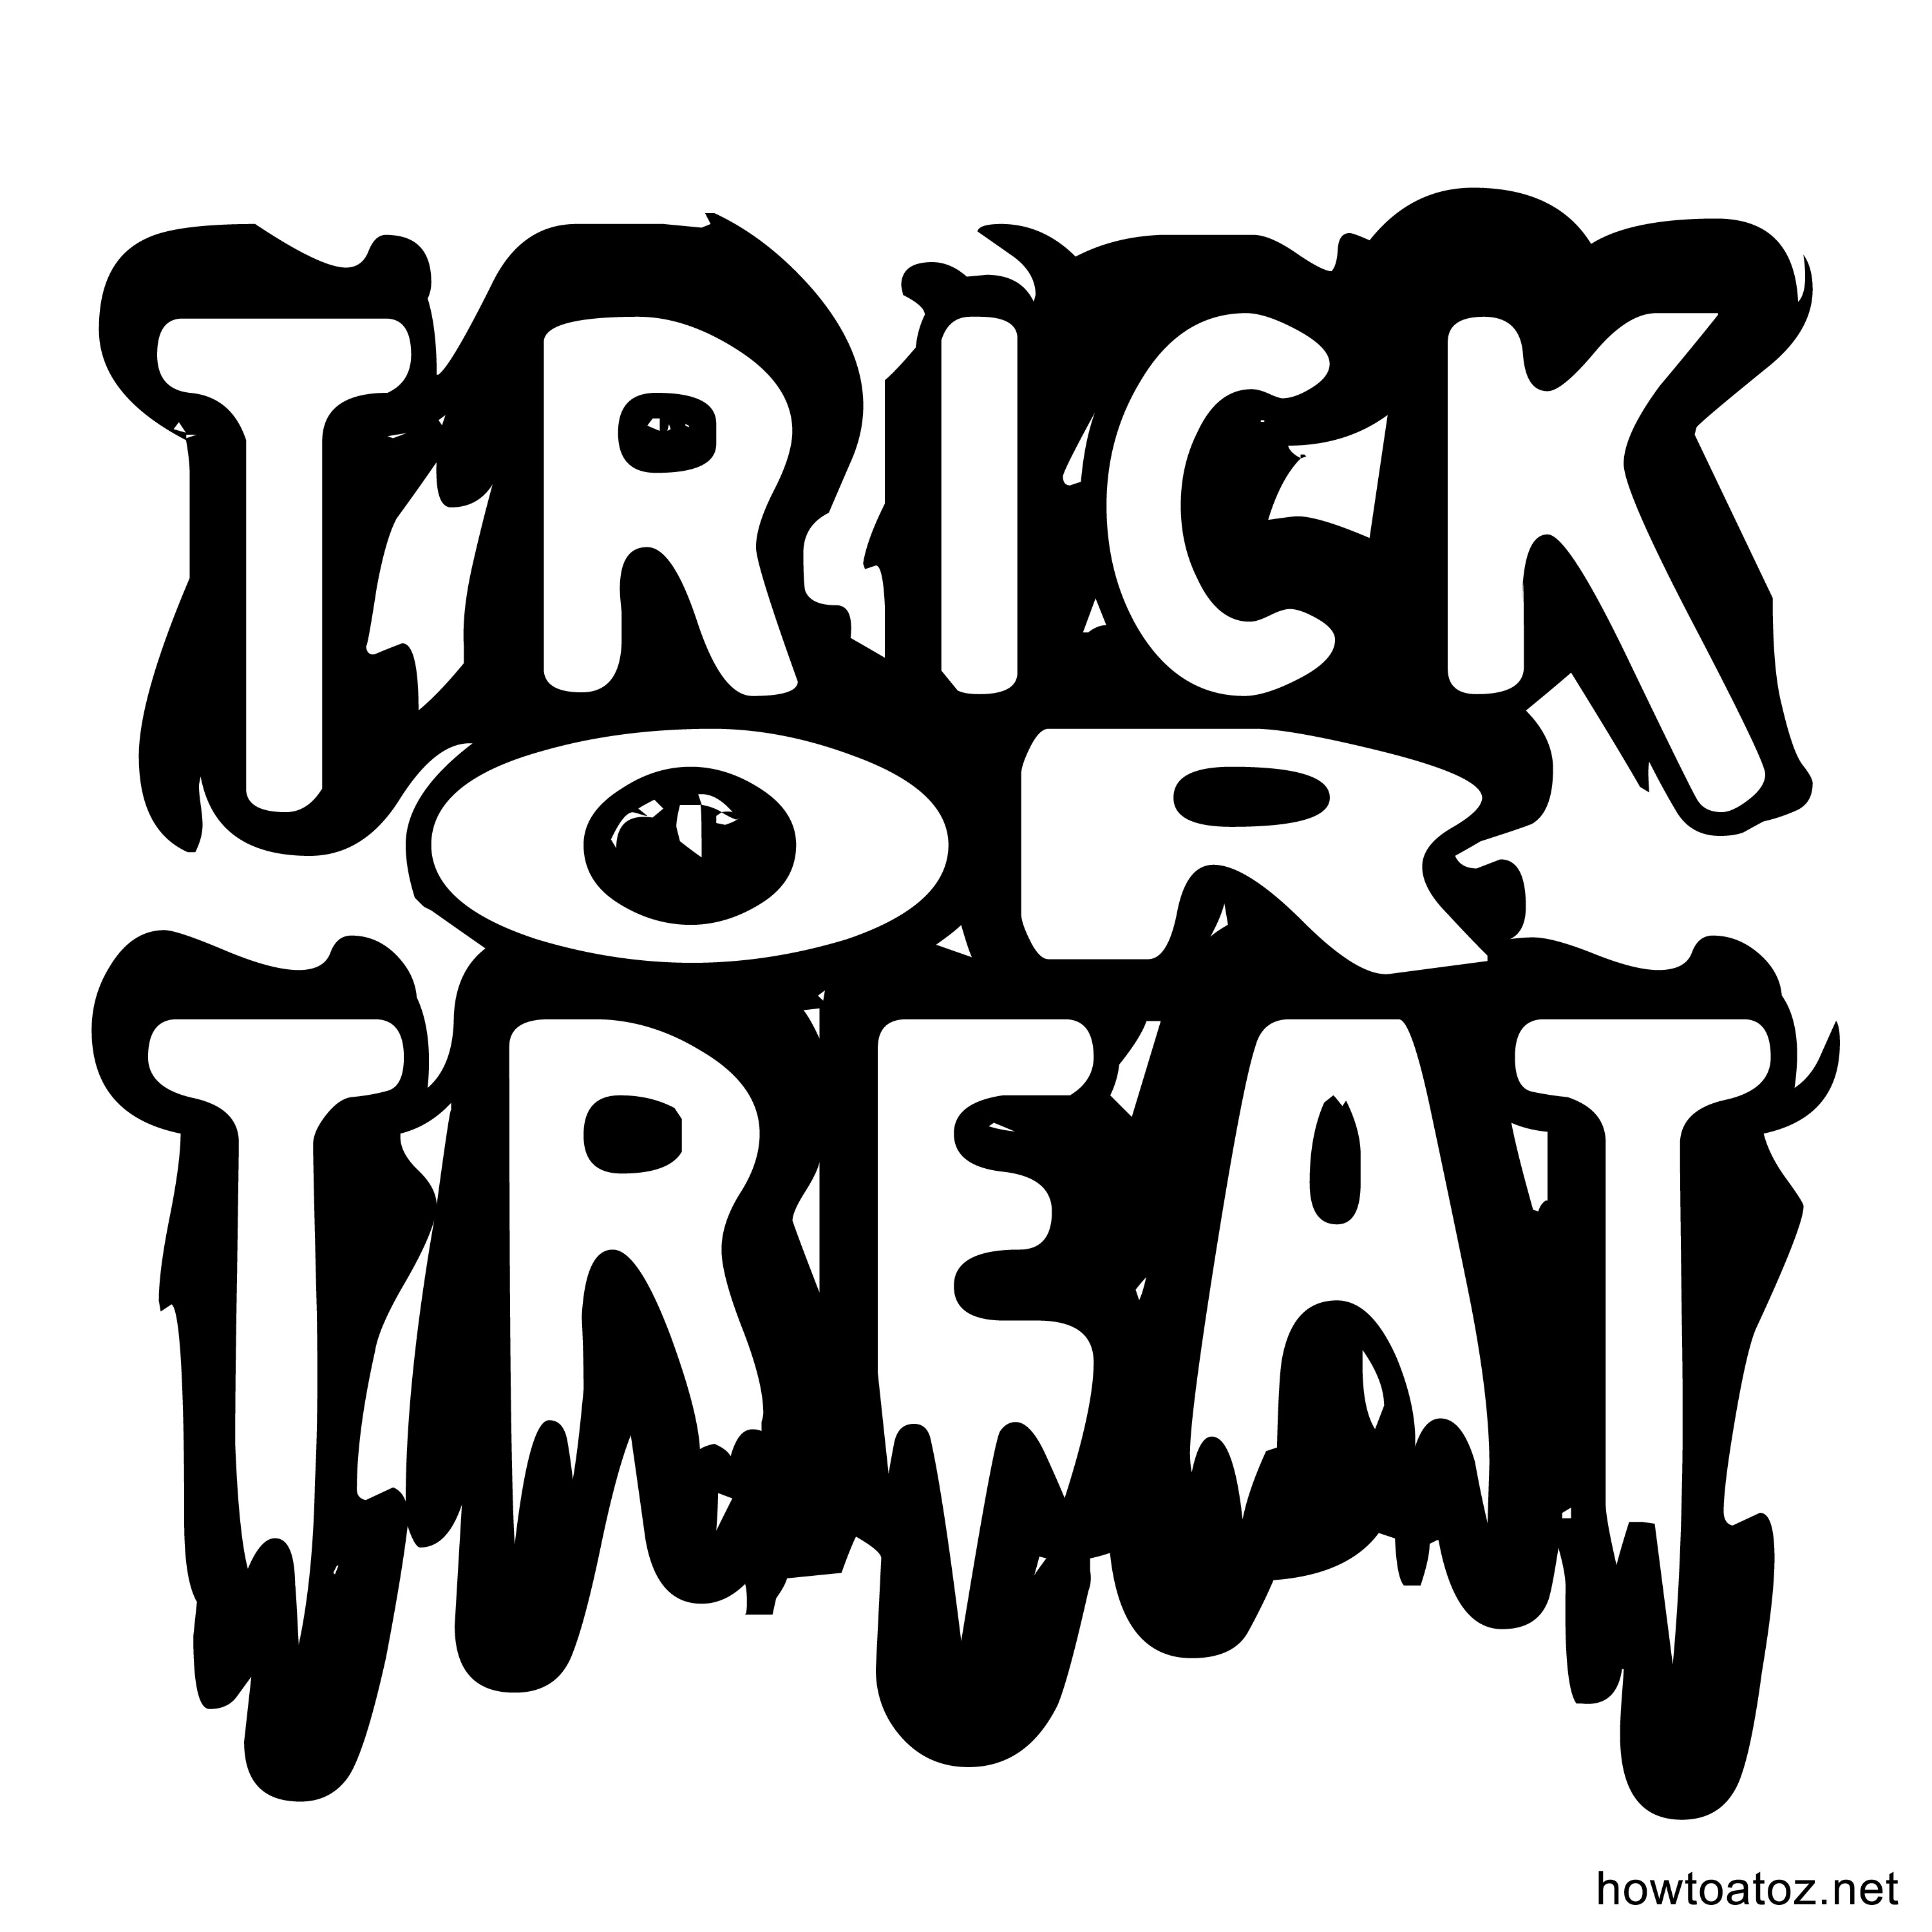 Printable Cut Out Halloween Decorations | Halloween Arts - Free Printable Halloween Decorations